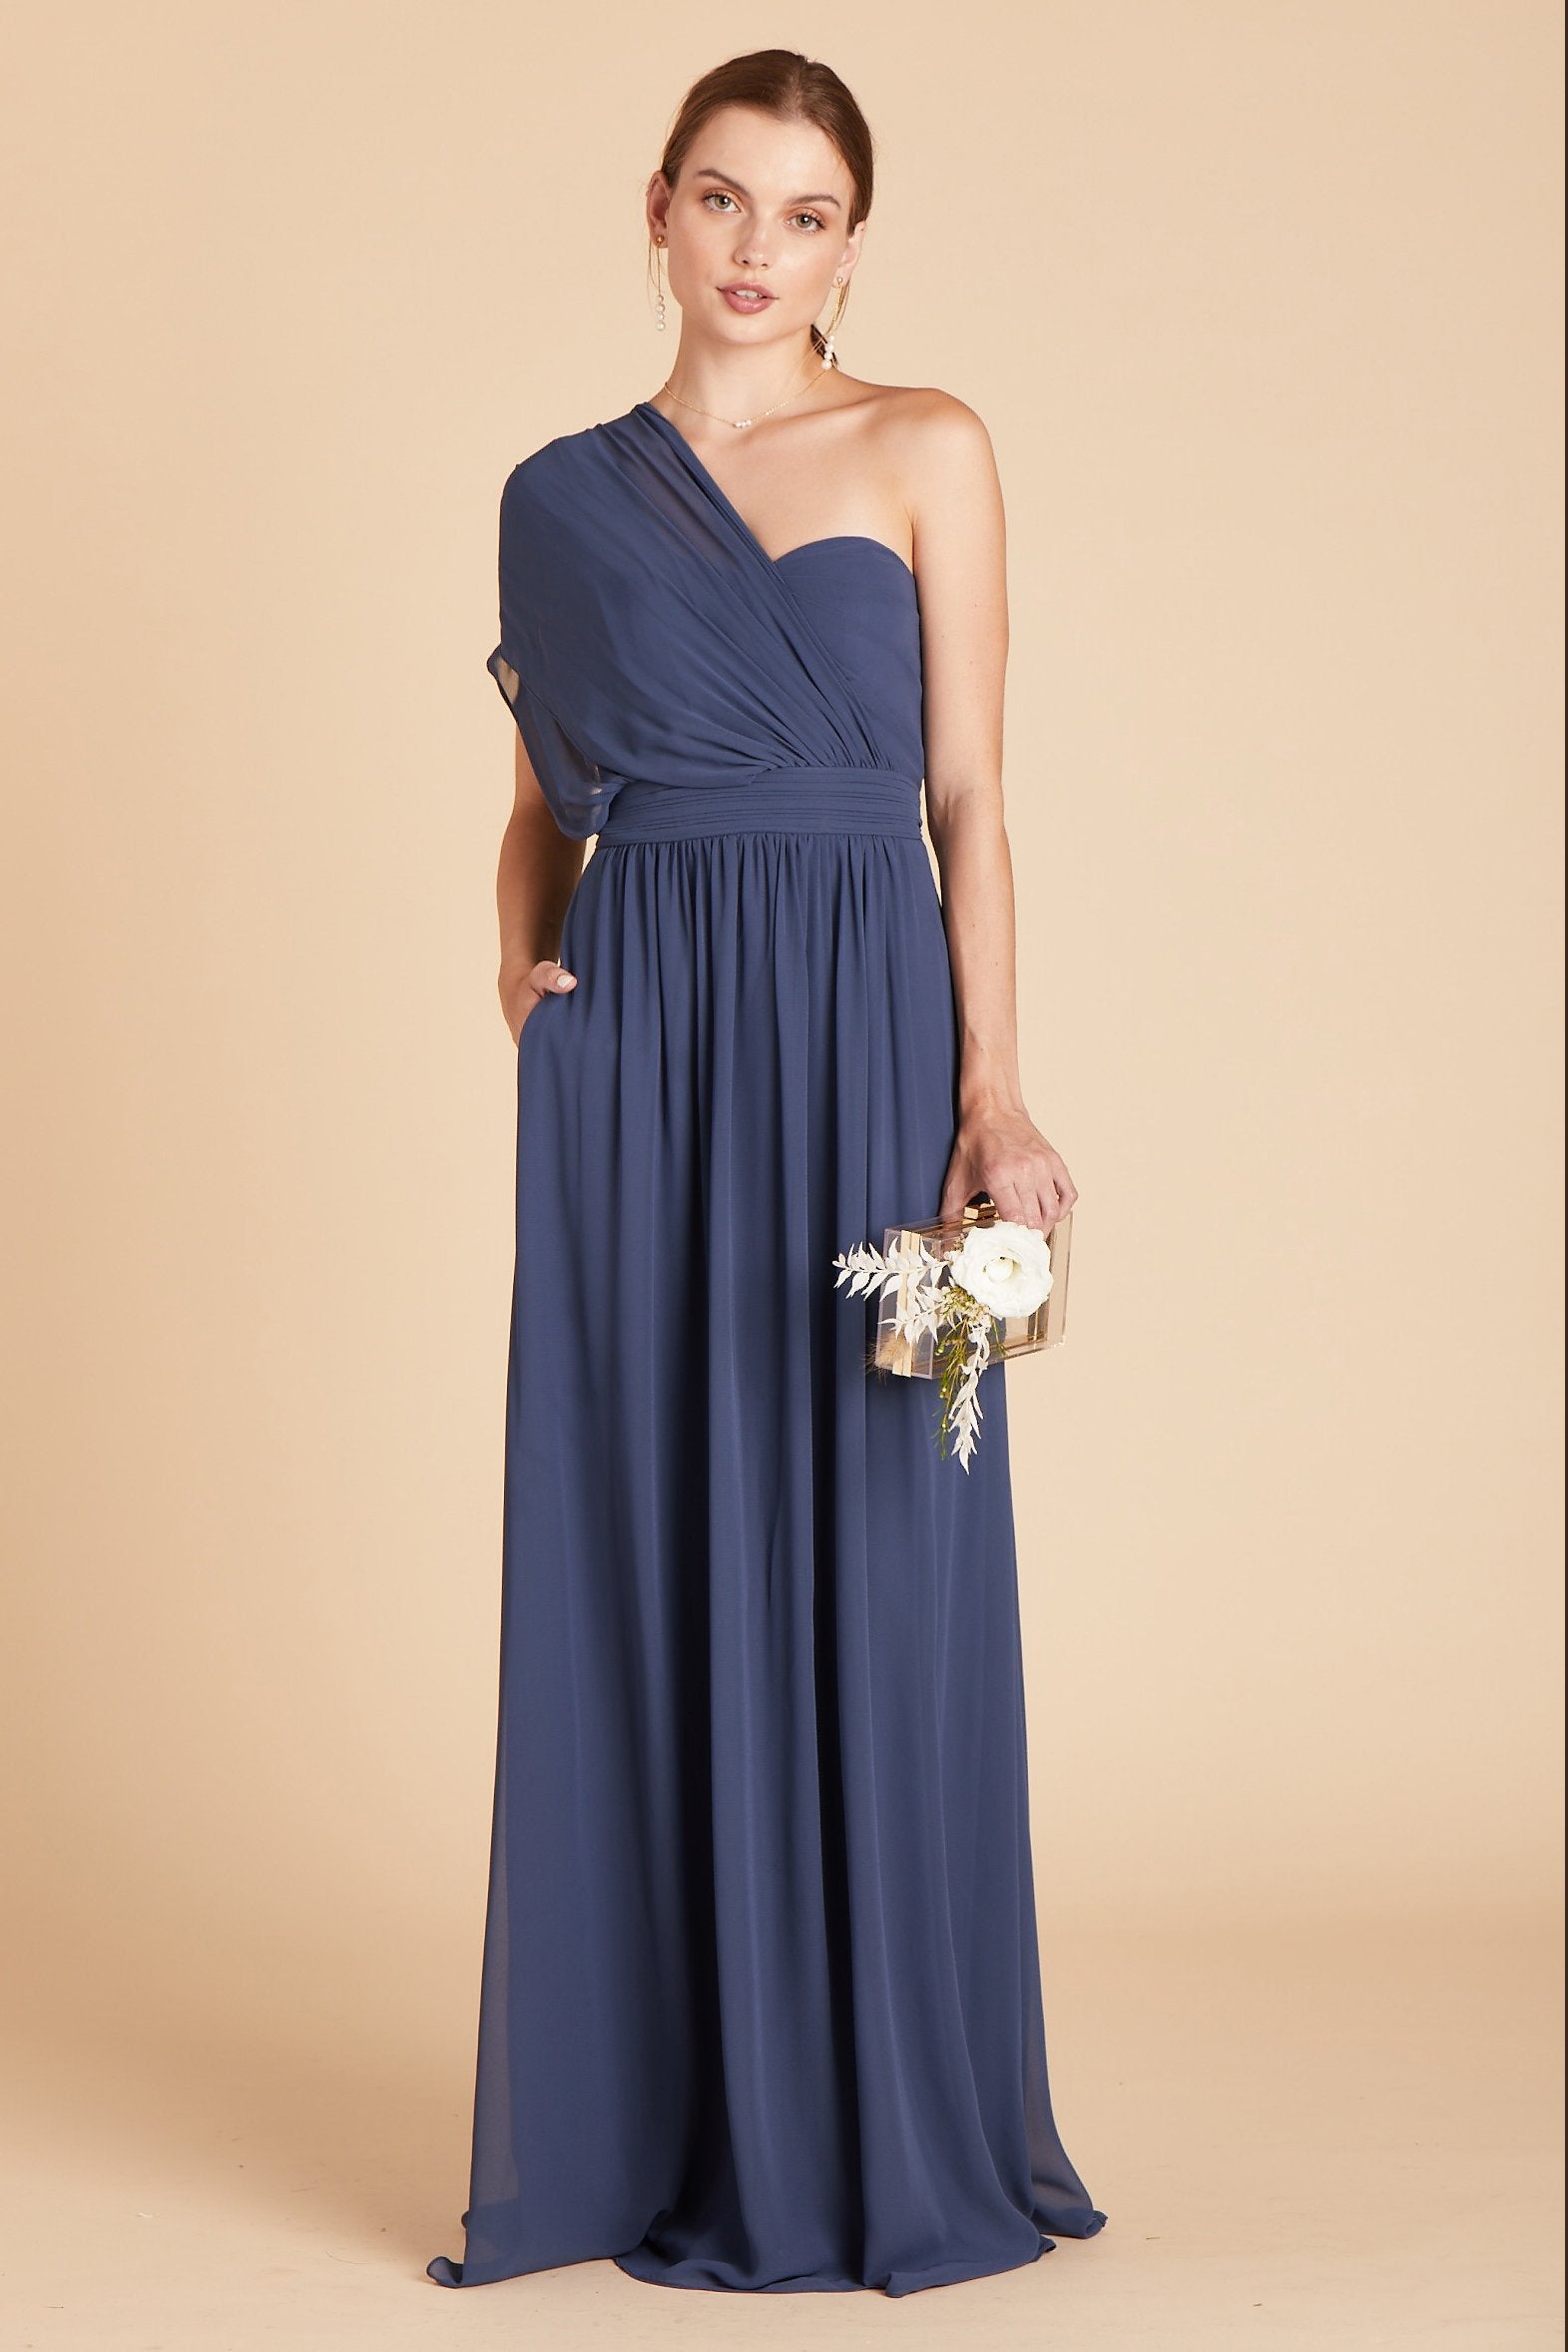 Grace convertible bridesmaid dress in slate blue chiffon by Birdy Grey, front view with hand in pocket